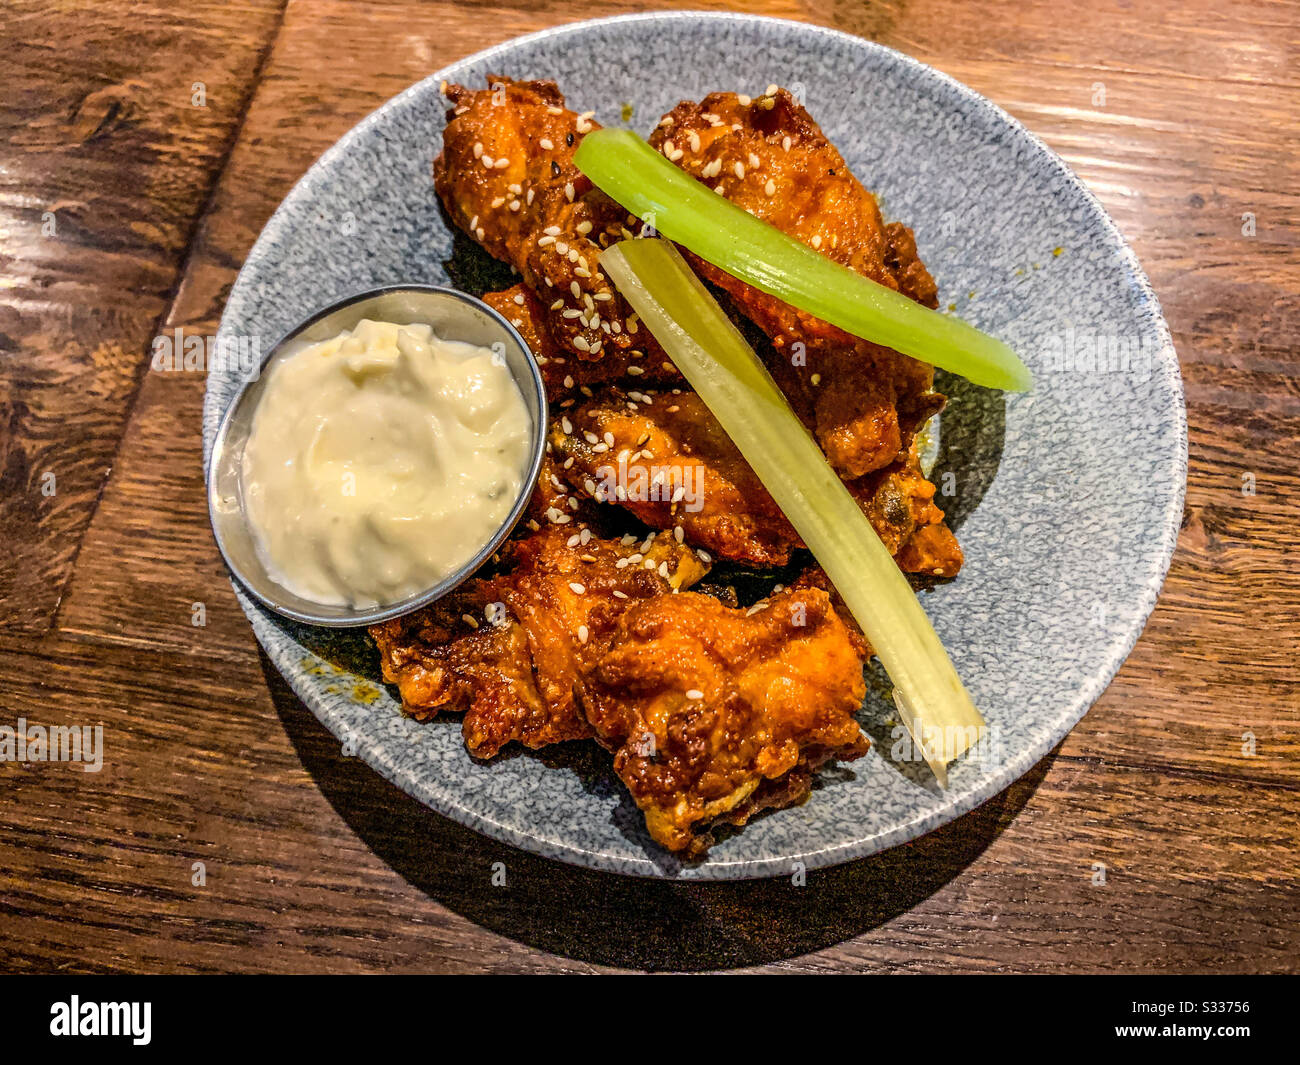 Spicy chicken wings with blue cheese sauce and celery sticks Stock Photo